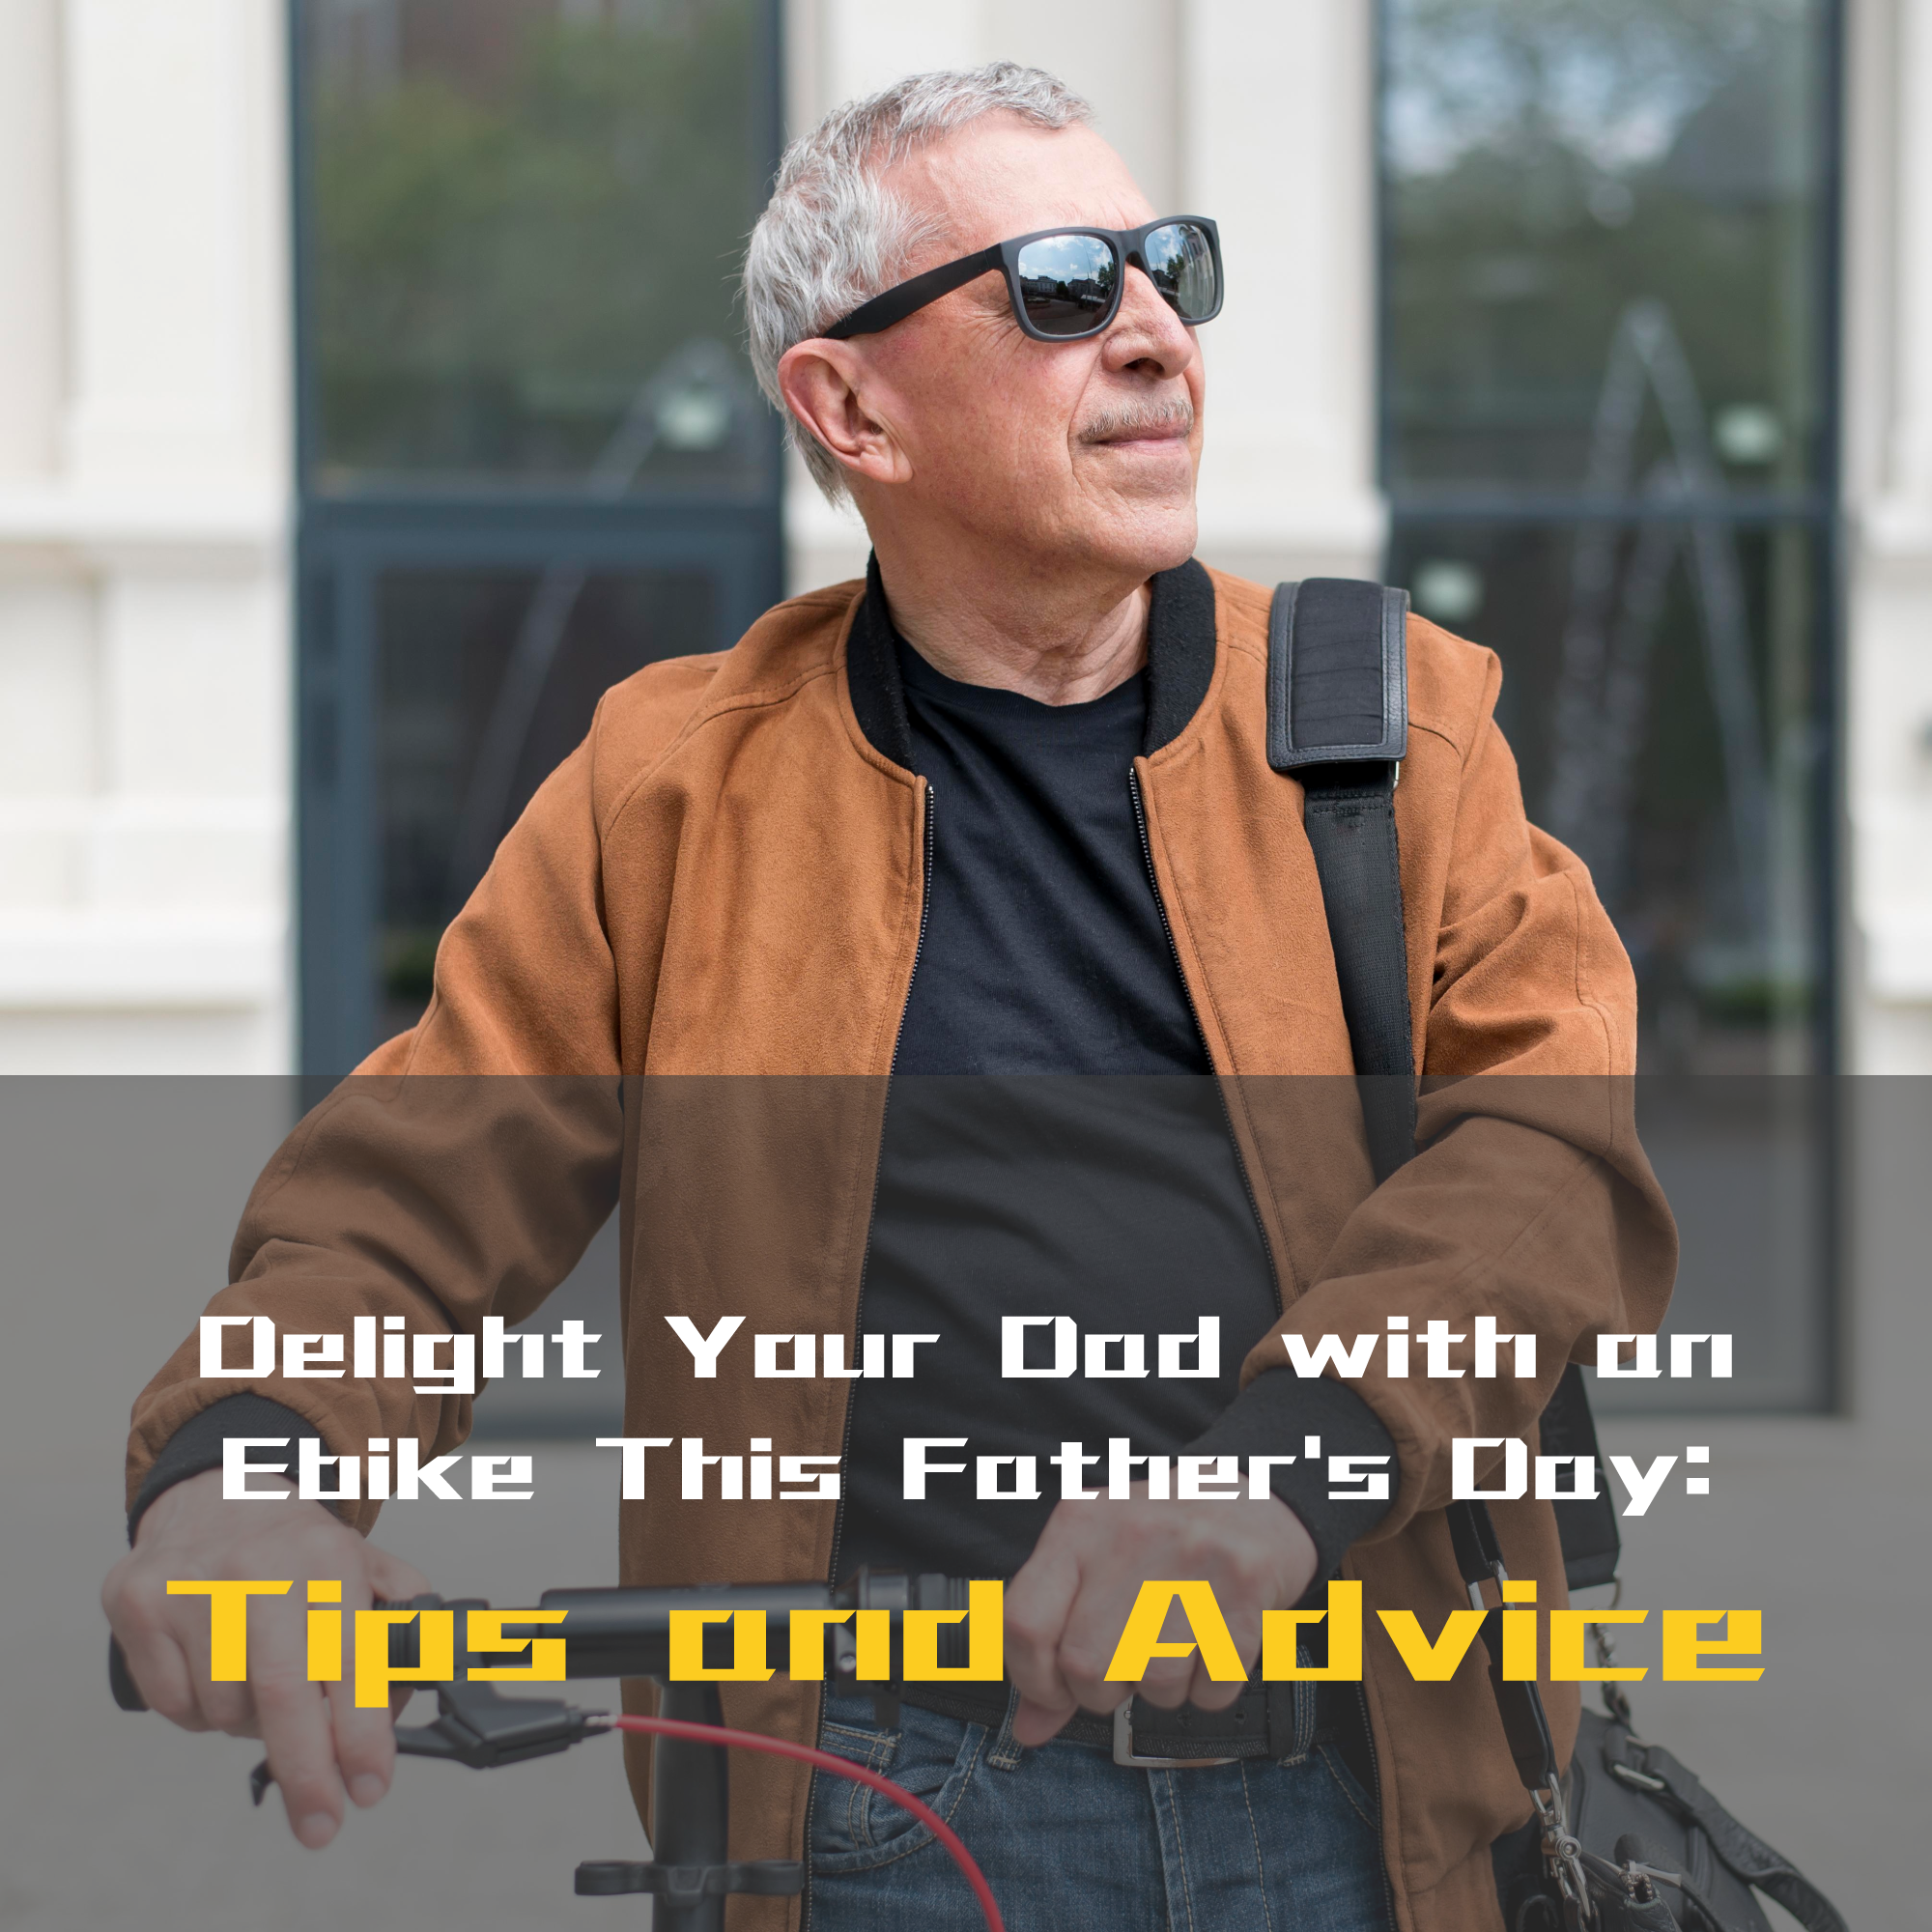 Delight Your Dad with an Ebike This Father's Day: Tips and Advice